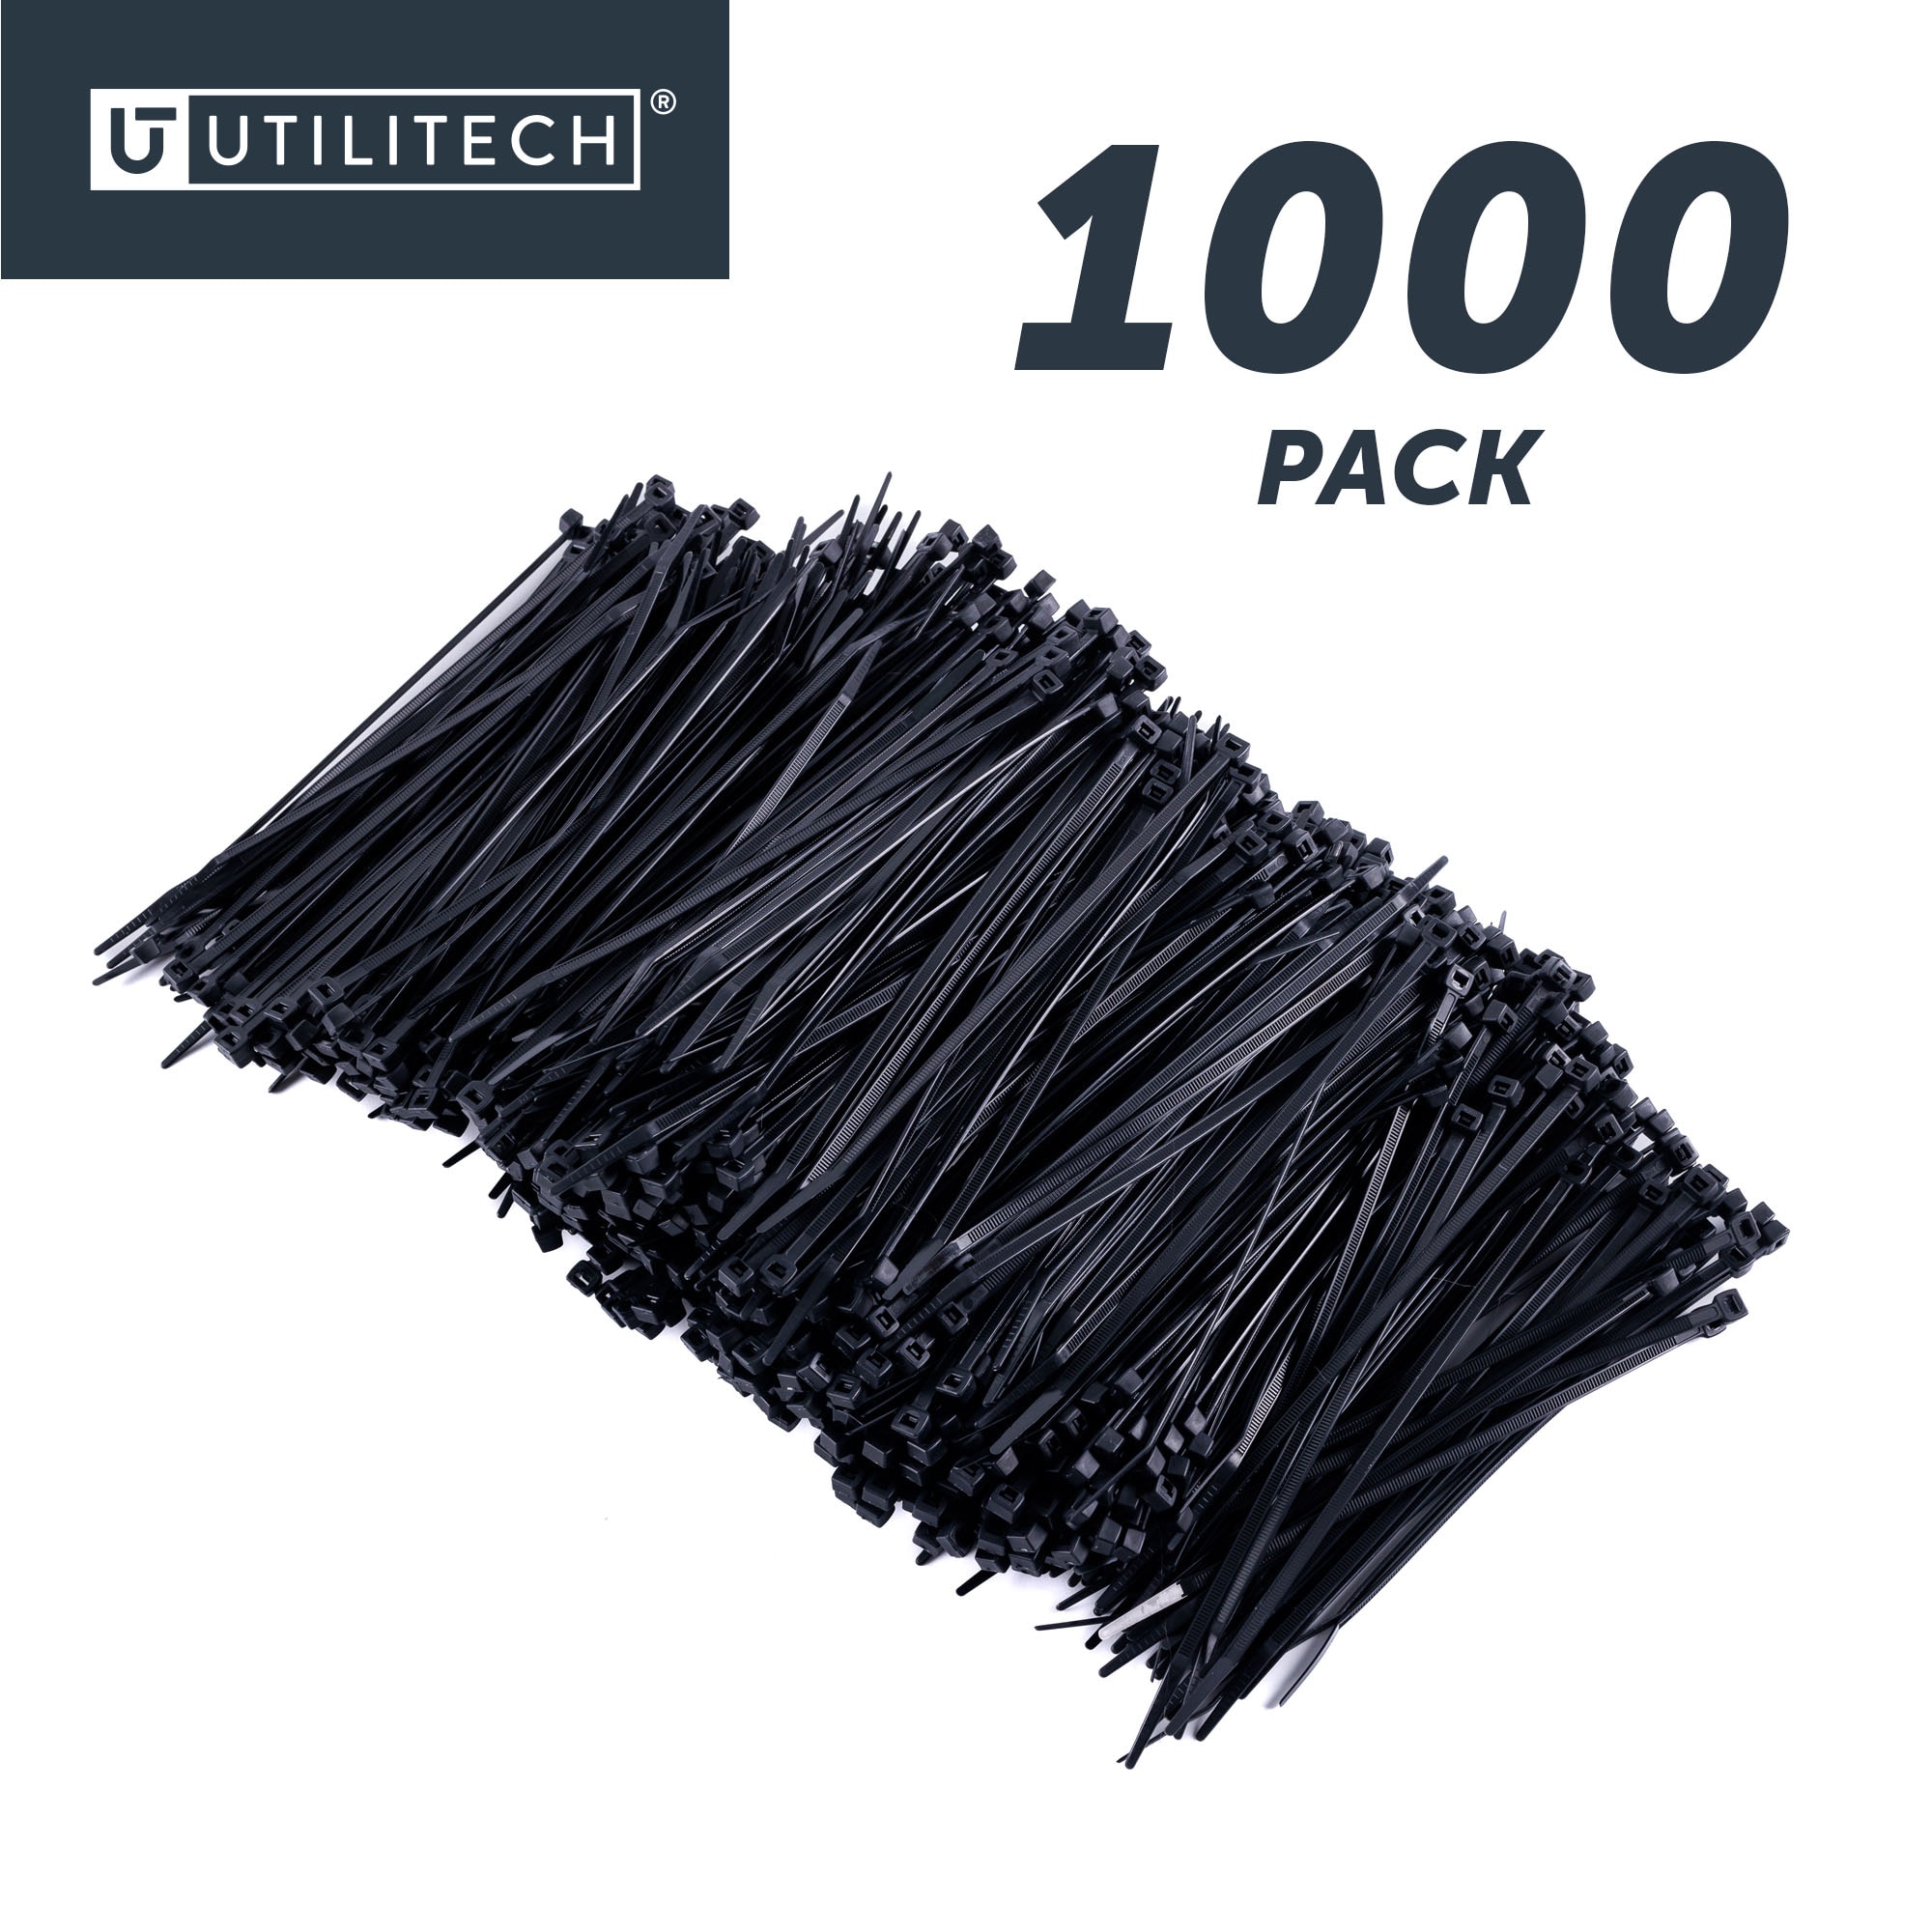 Utilitech 8-in Nylon Zip Ties Black with Uv Protection (300-Pack)